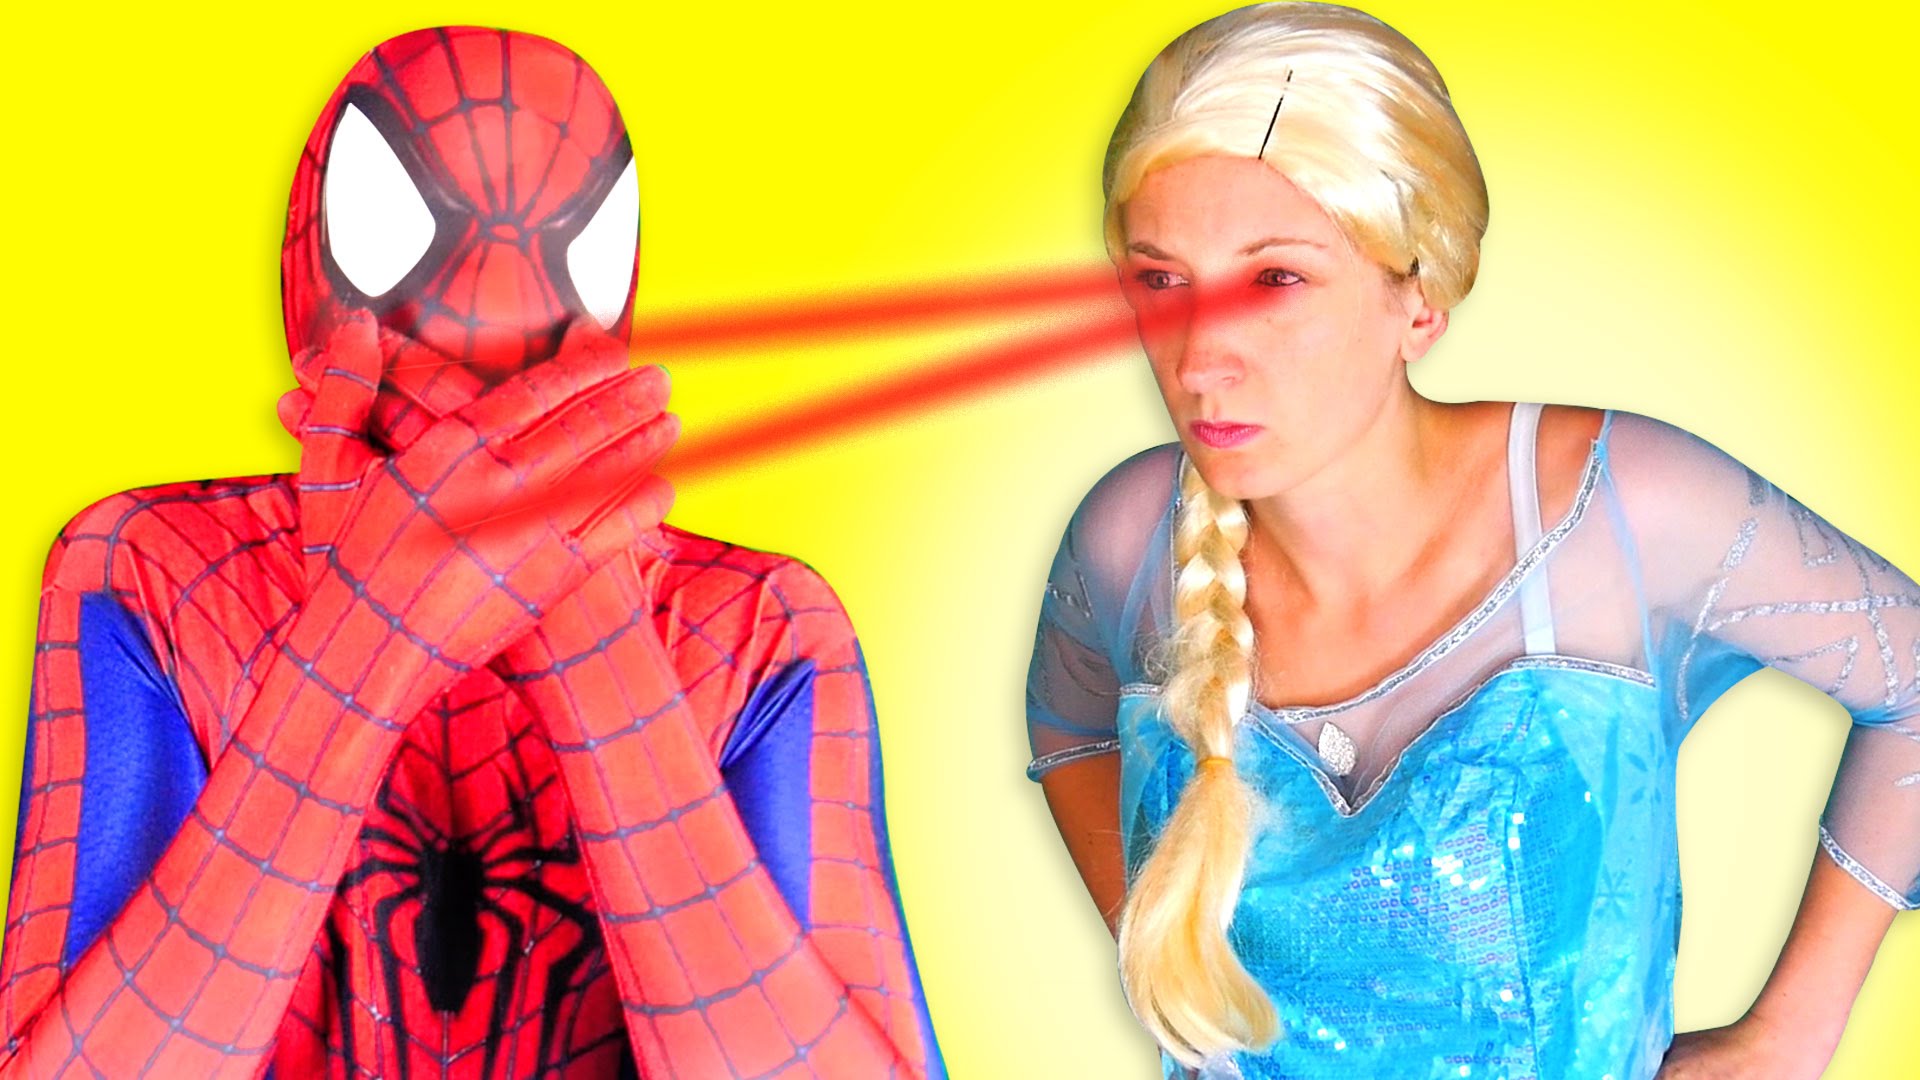 rundvlees pin doden Superhero Spiderman on Twitter: "Spider- Man and The Princess Elsa -  Spiderman vs Frozen Elsa vs Evil Queen, In Real Life  https://t.co/O5tK4t3Qsd https://t.co/nVKW0OPWmx" / Twitter